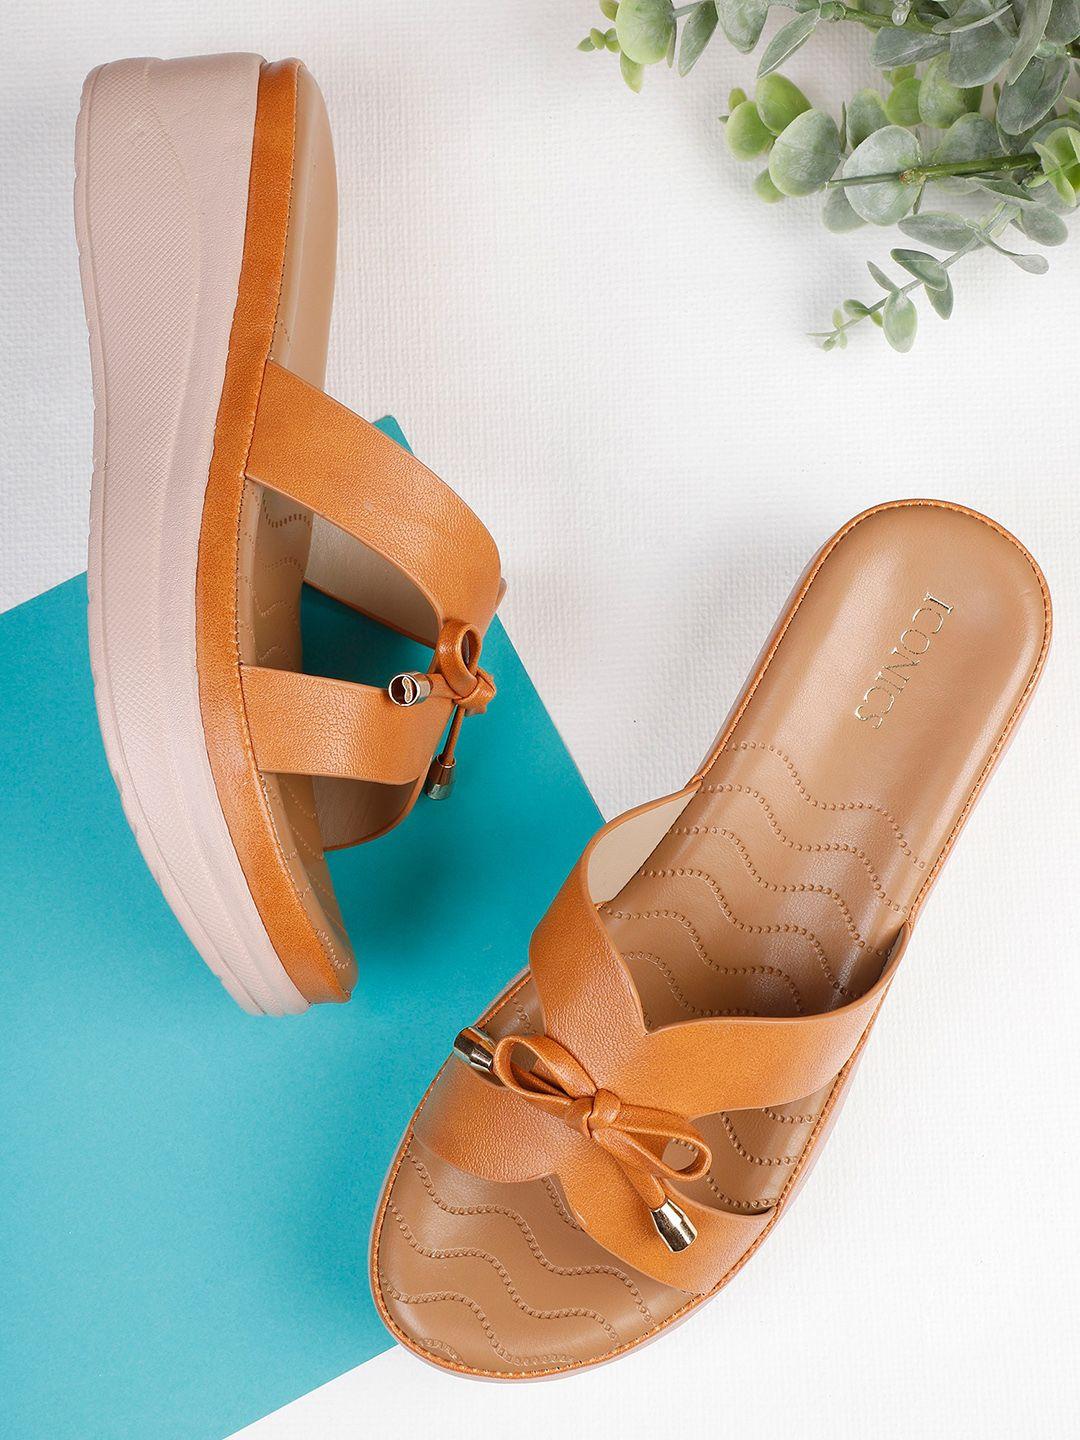 iconics tan pumps with bows